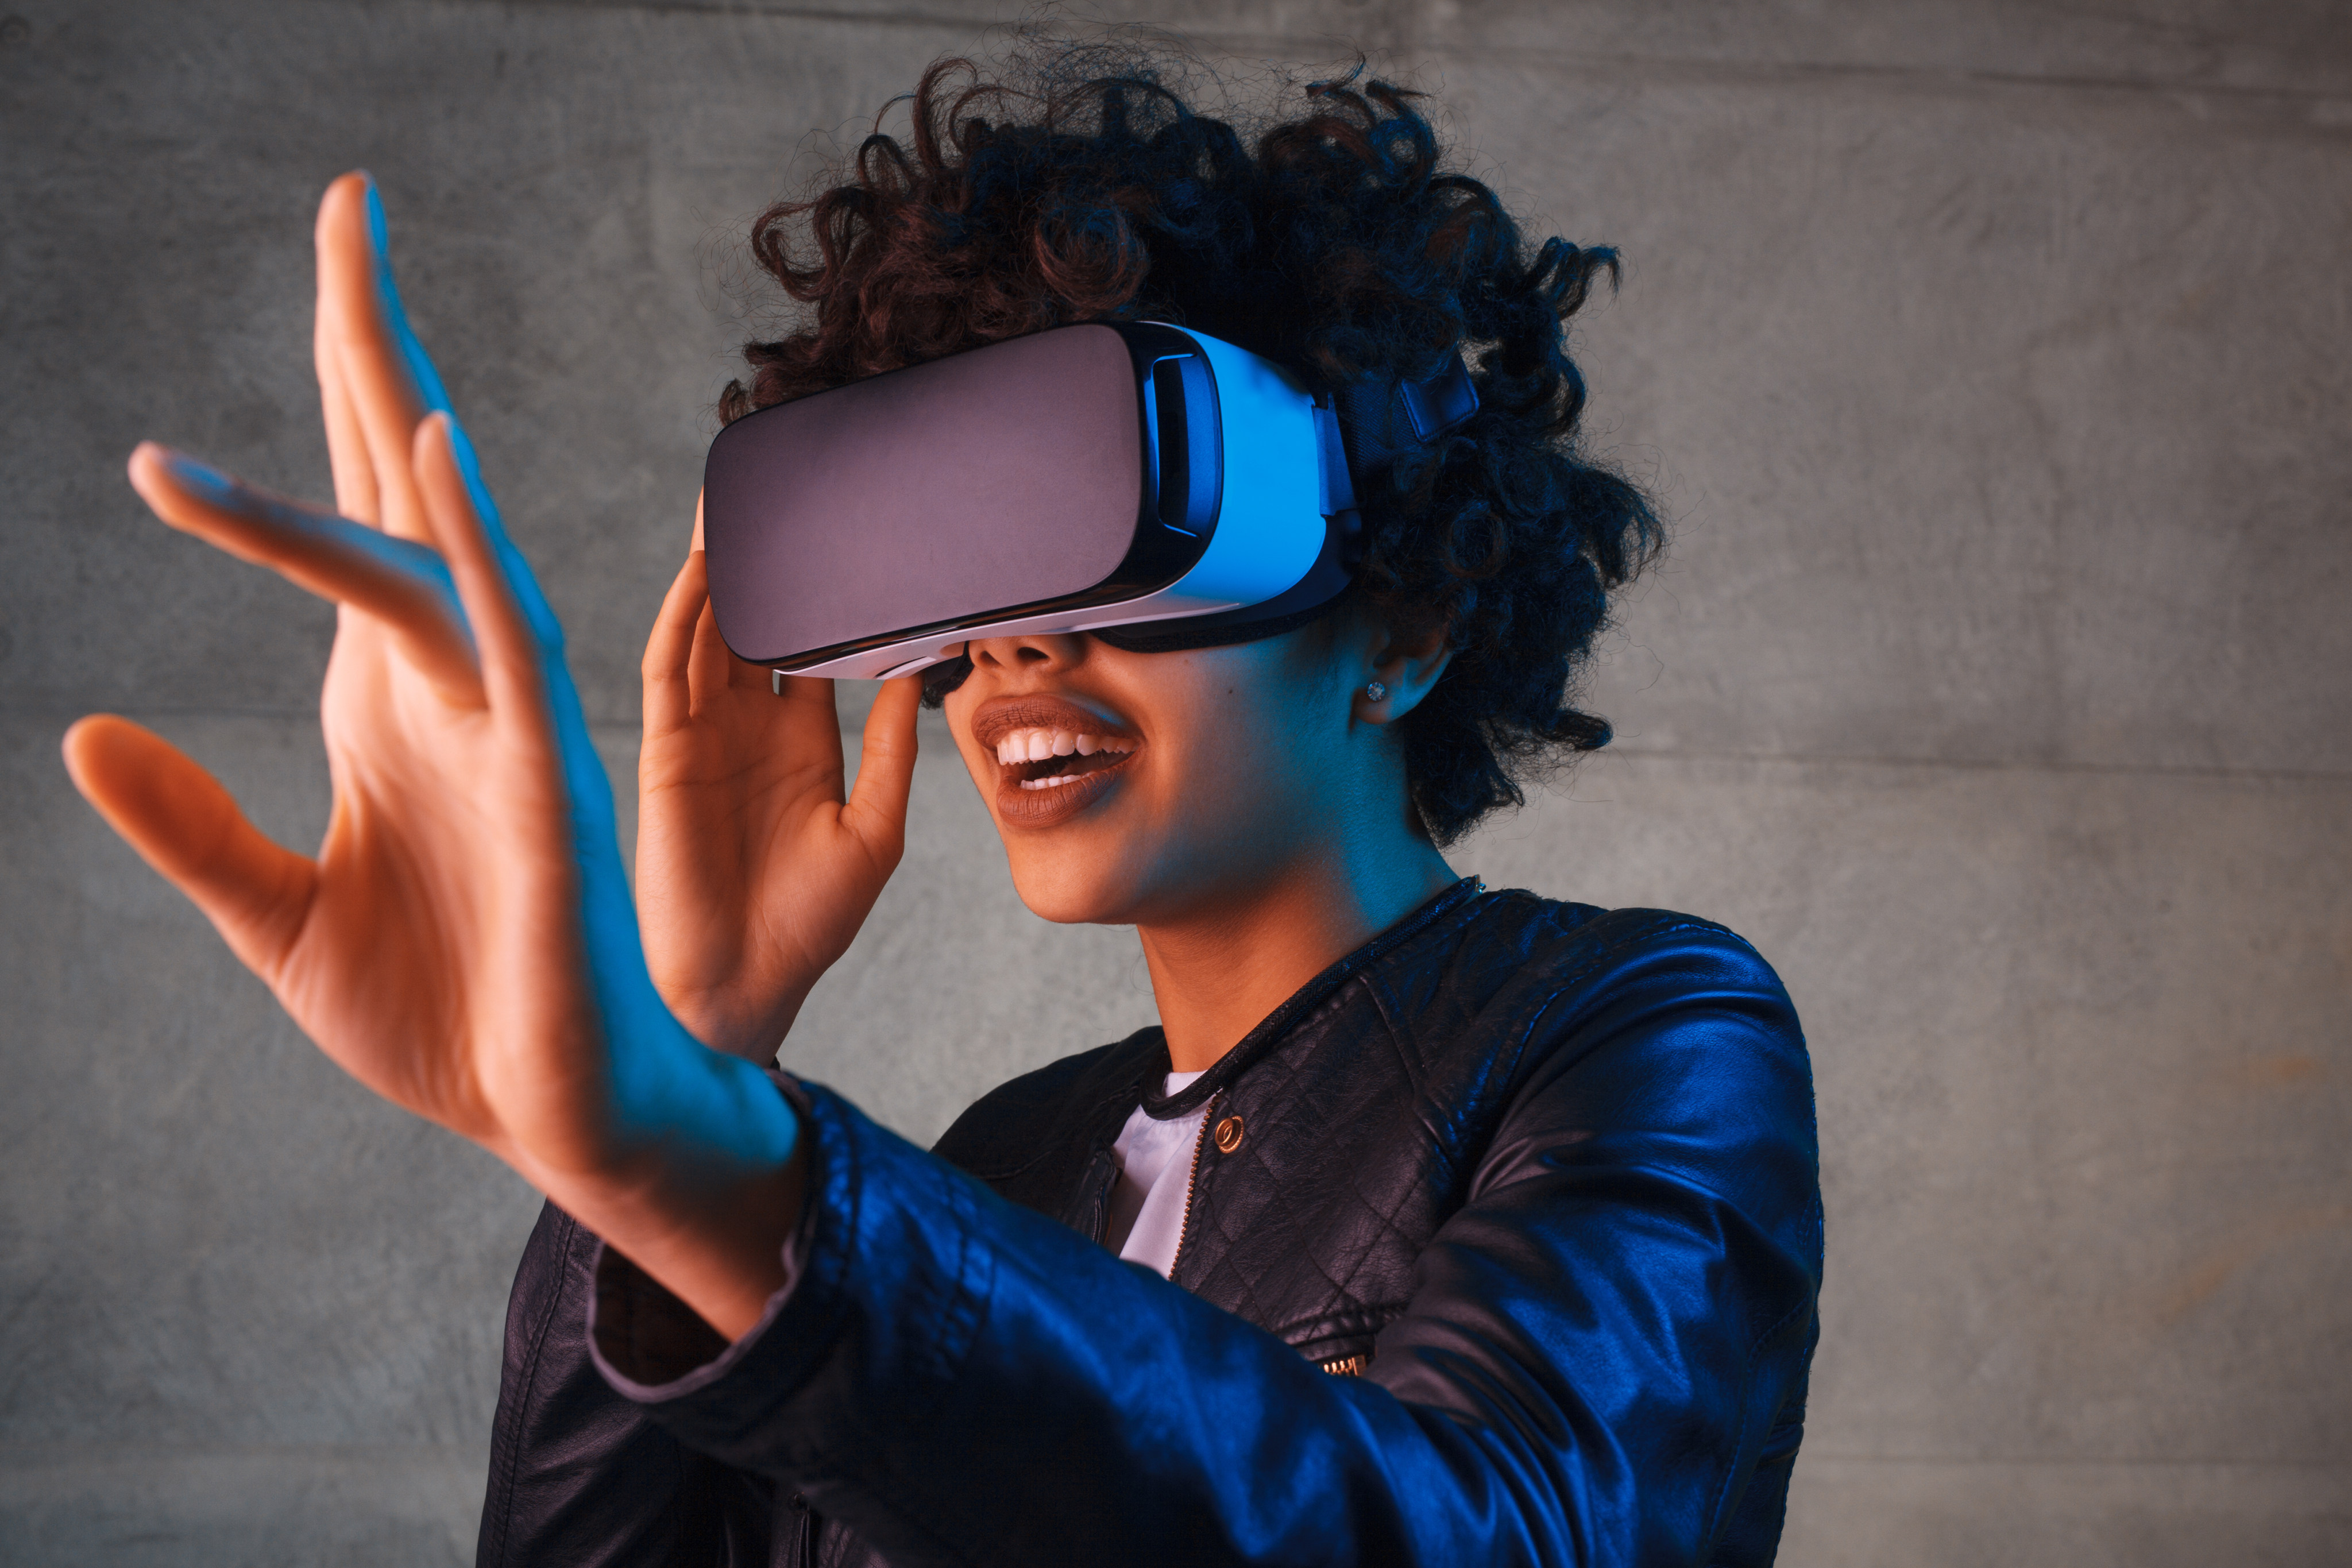 Woman touching the air during the virtual reality experience. Photo: Shutterstock